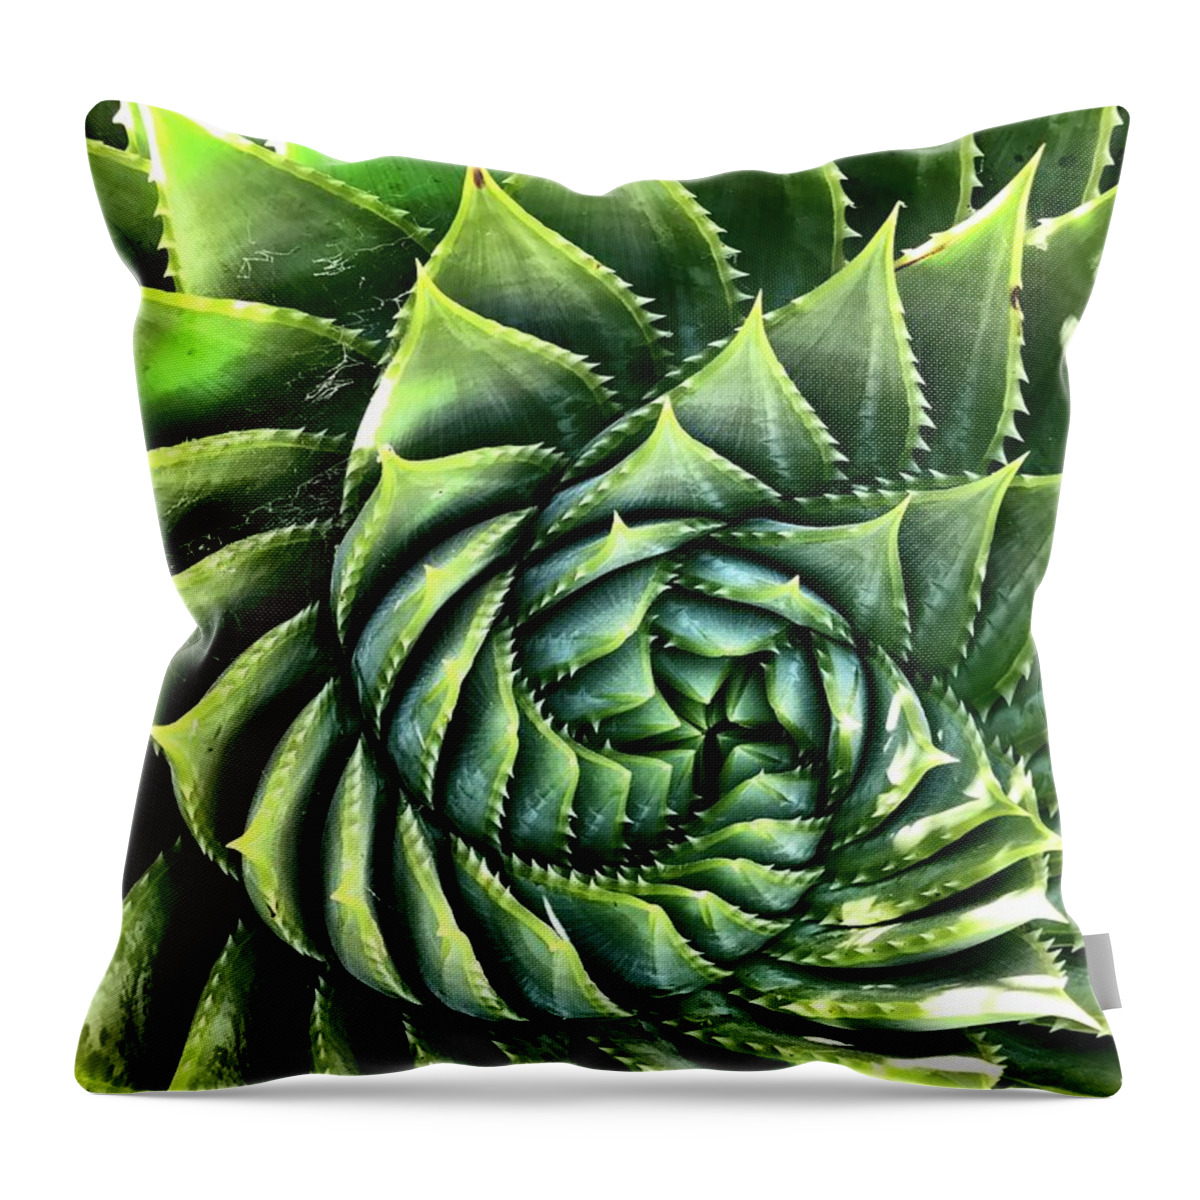  Throw Pillow featuring the photograph Spiral Succulent by Julie Gebhardt